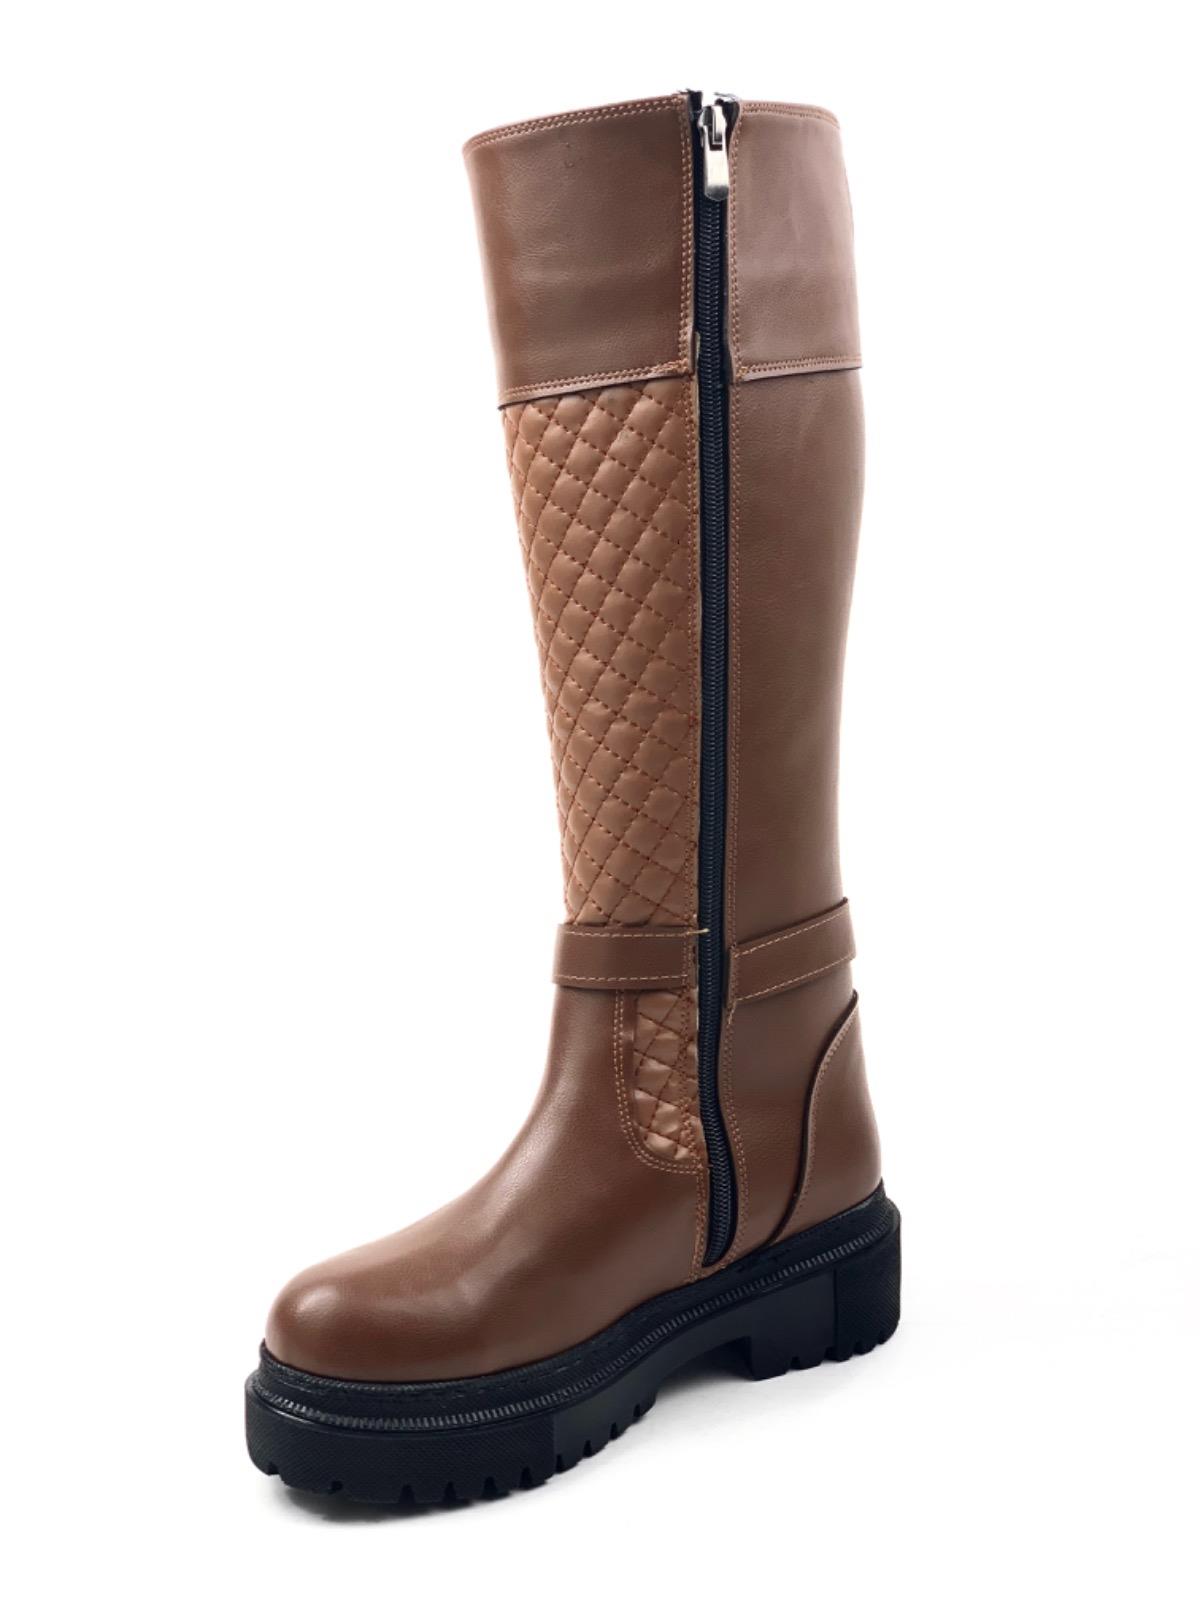 Women's Tan Janer Zippered Ready-made Thermo Sole Knee-high Patterned Buckle Boots - STREETMODE™